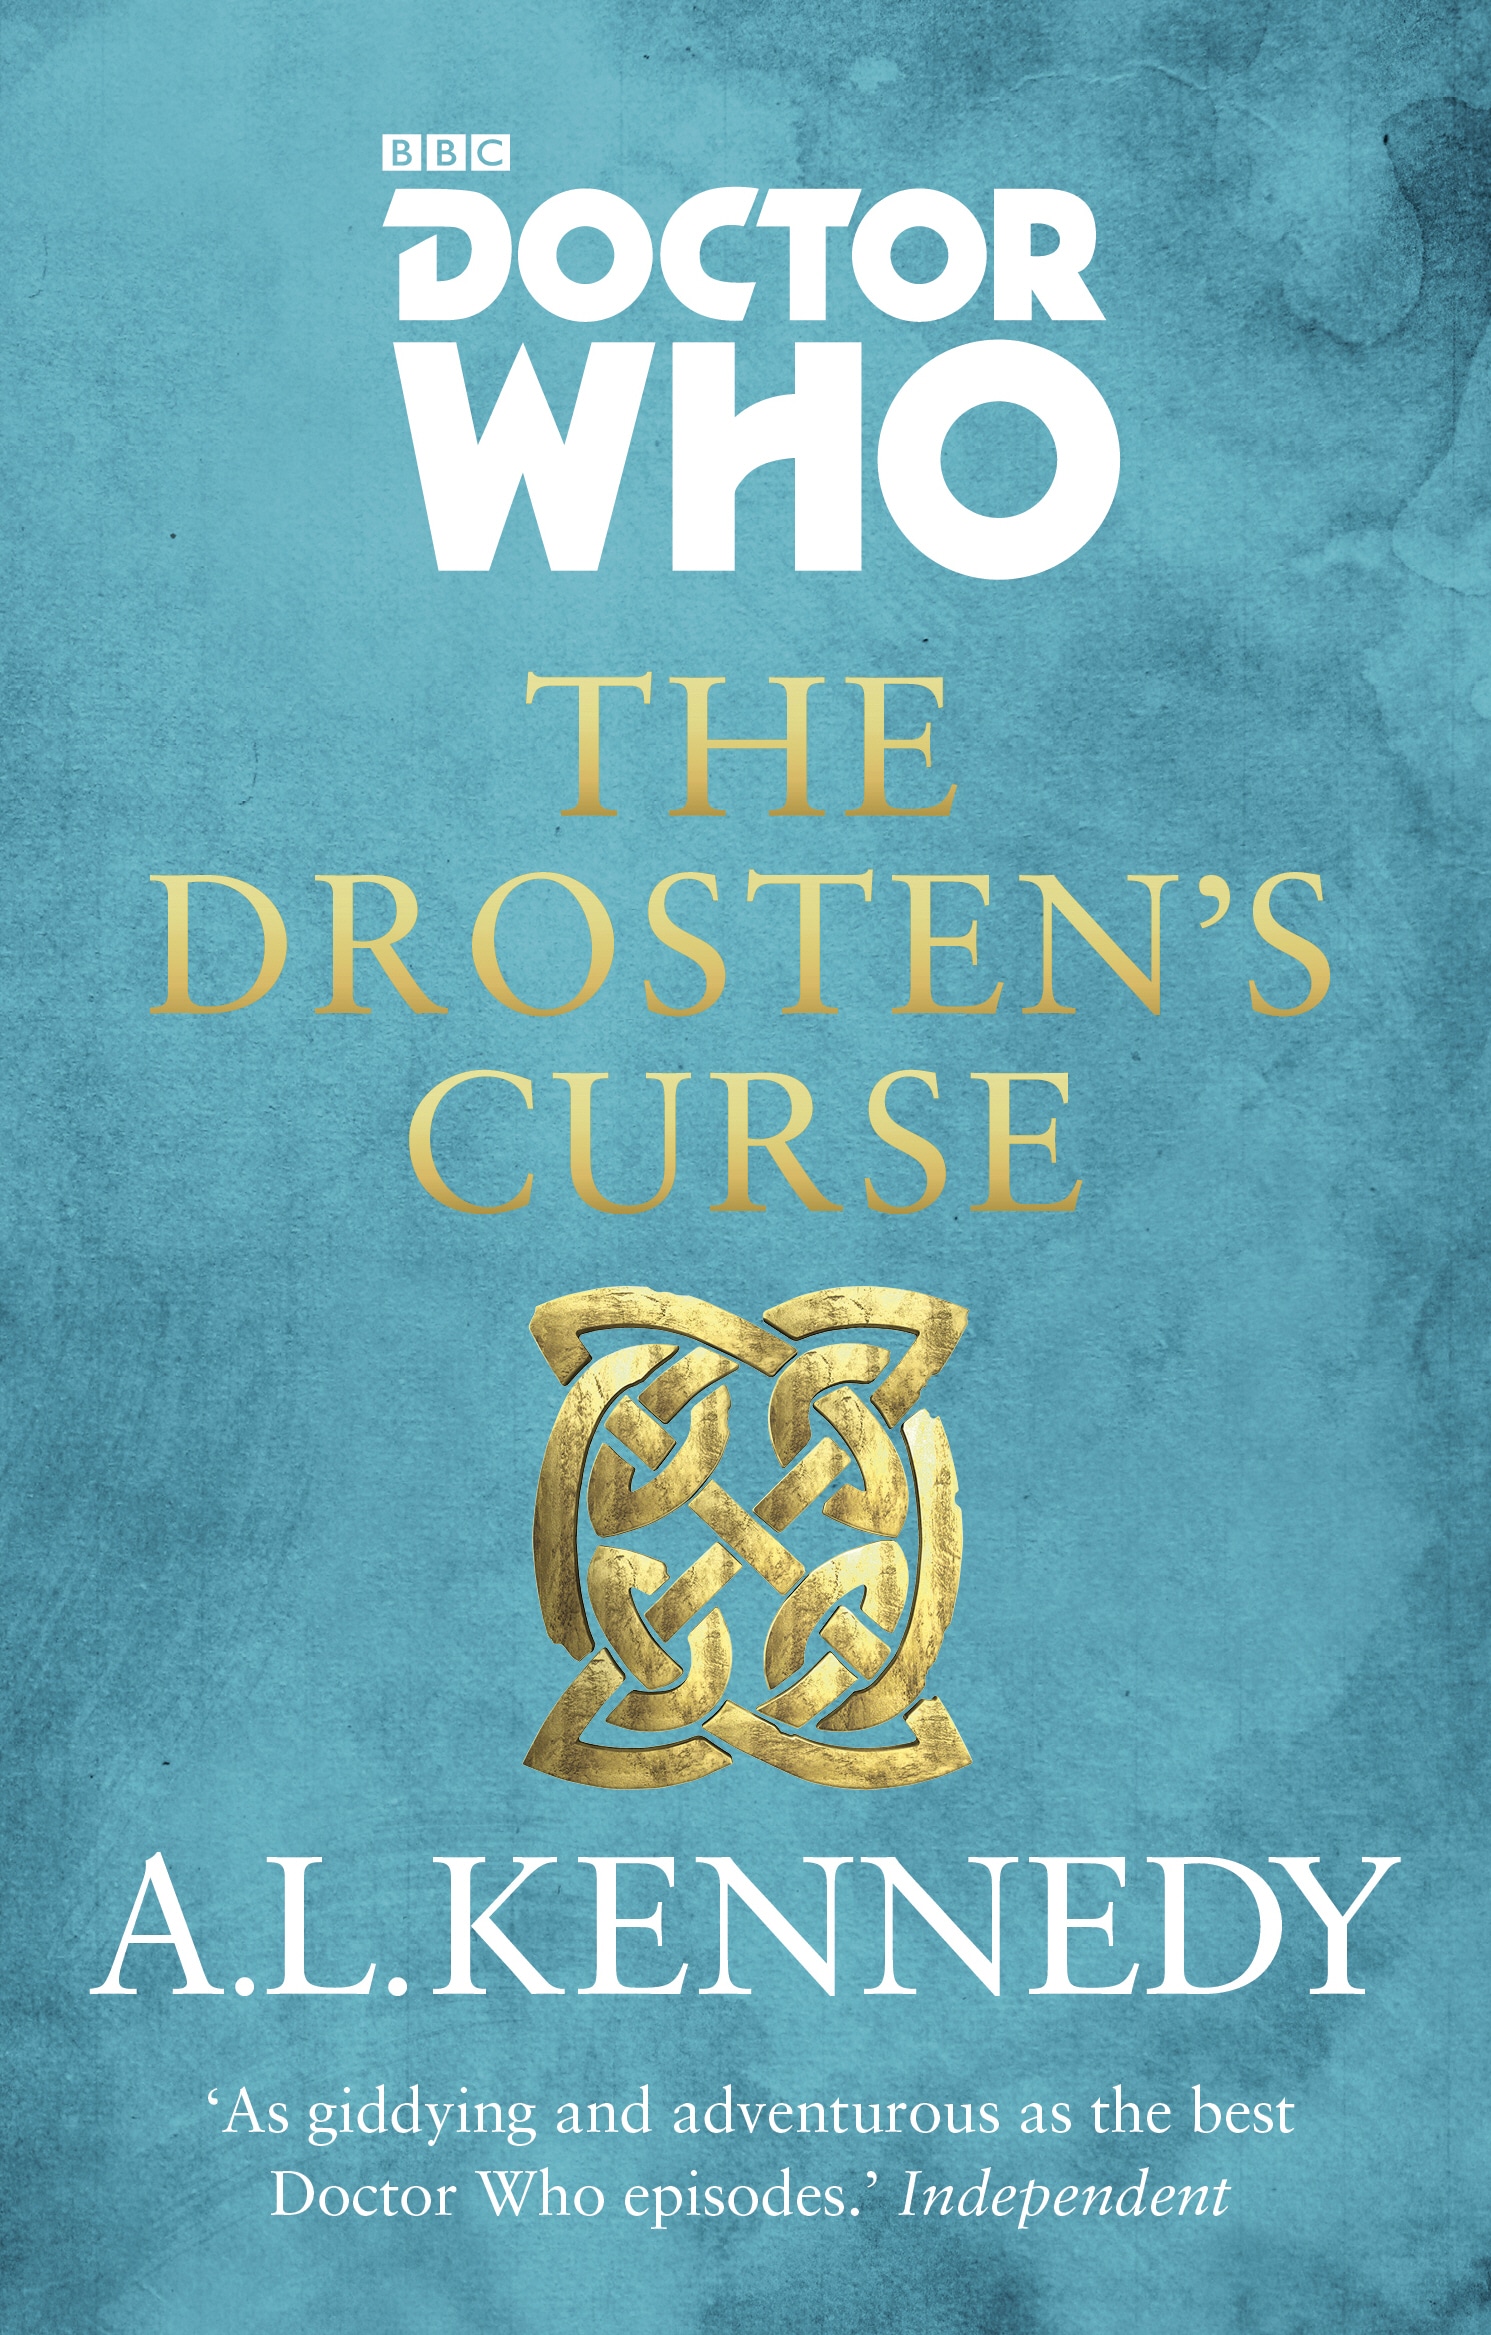 Book “Doctor Who: The Drosten’s Curse” by A.L. Kennedy — January 21, 2016